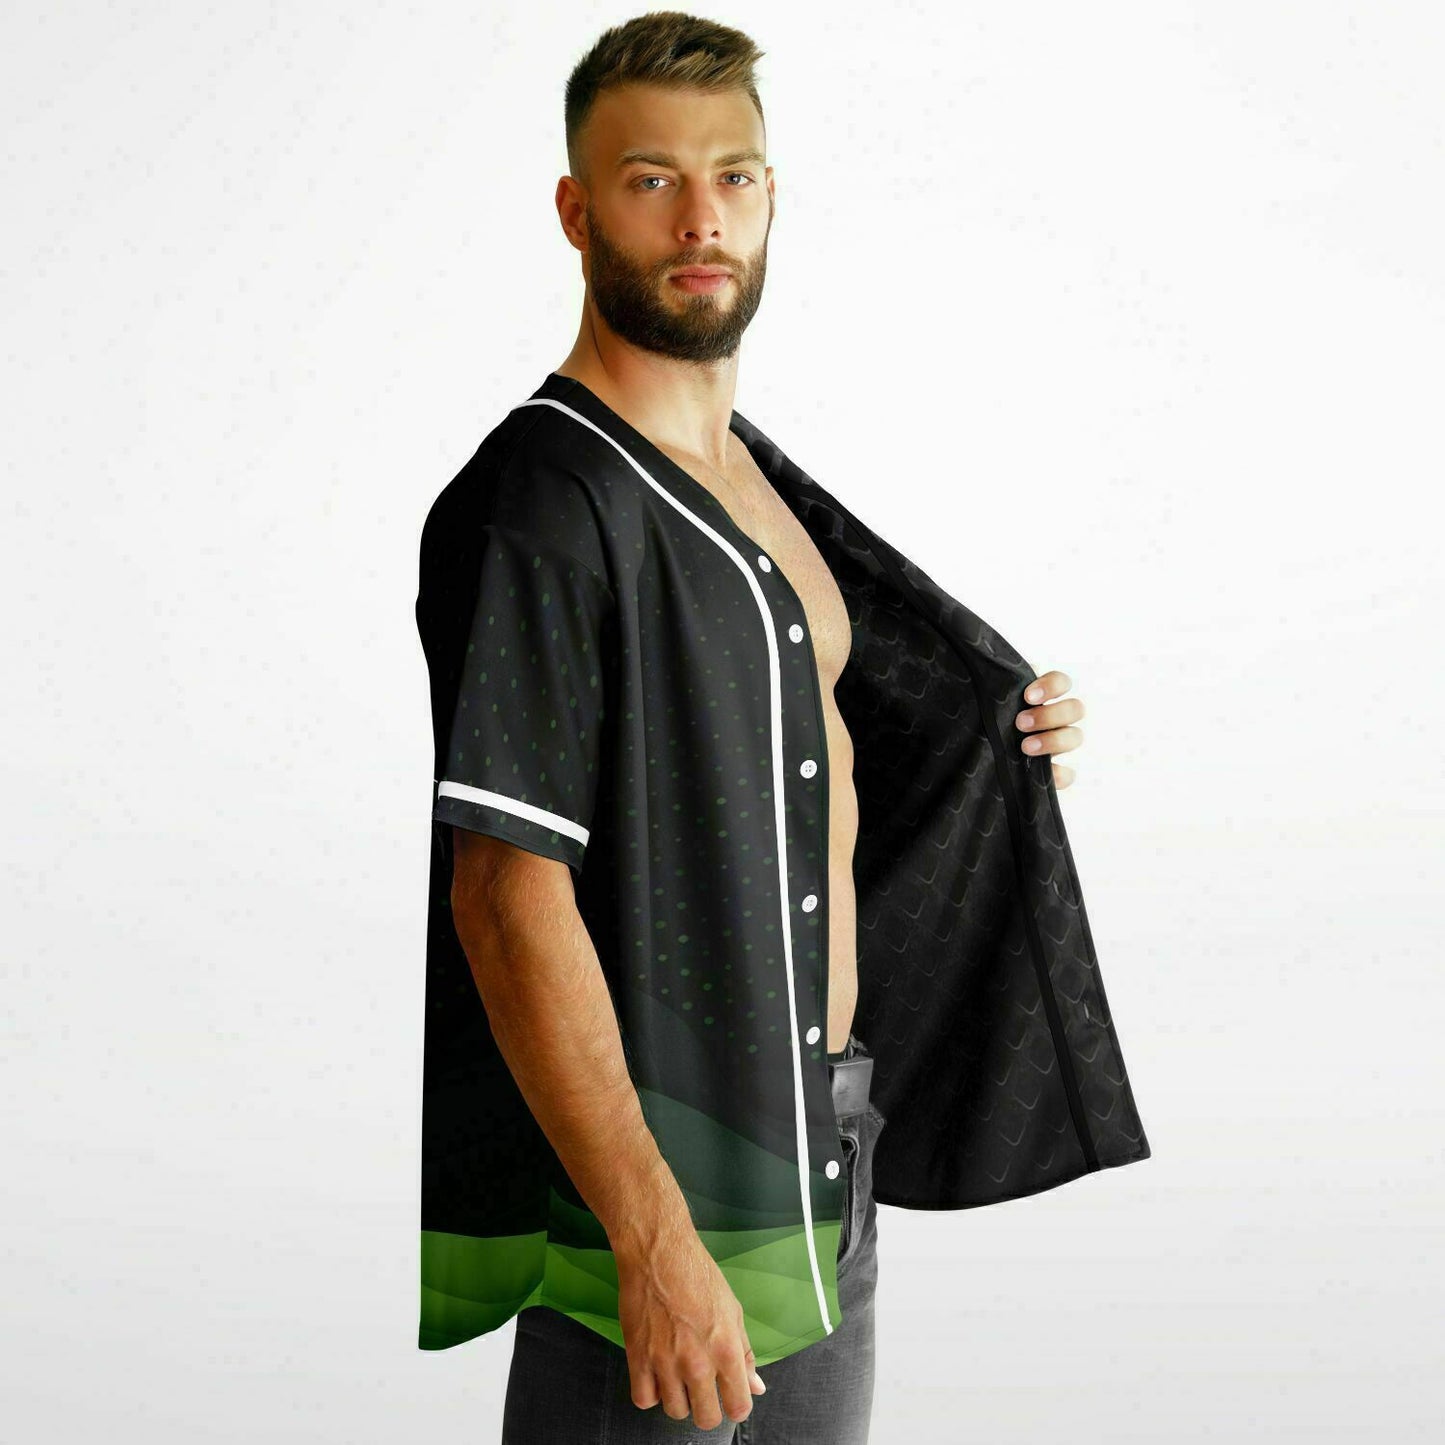 Reversible Sting Ray Jersey